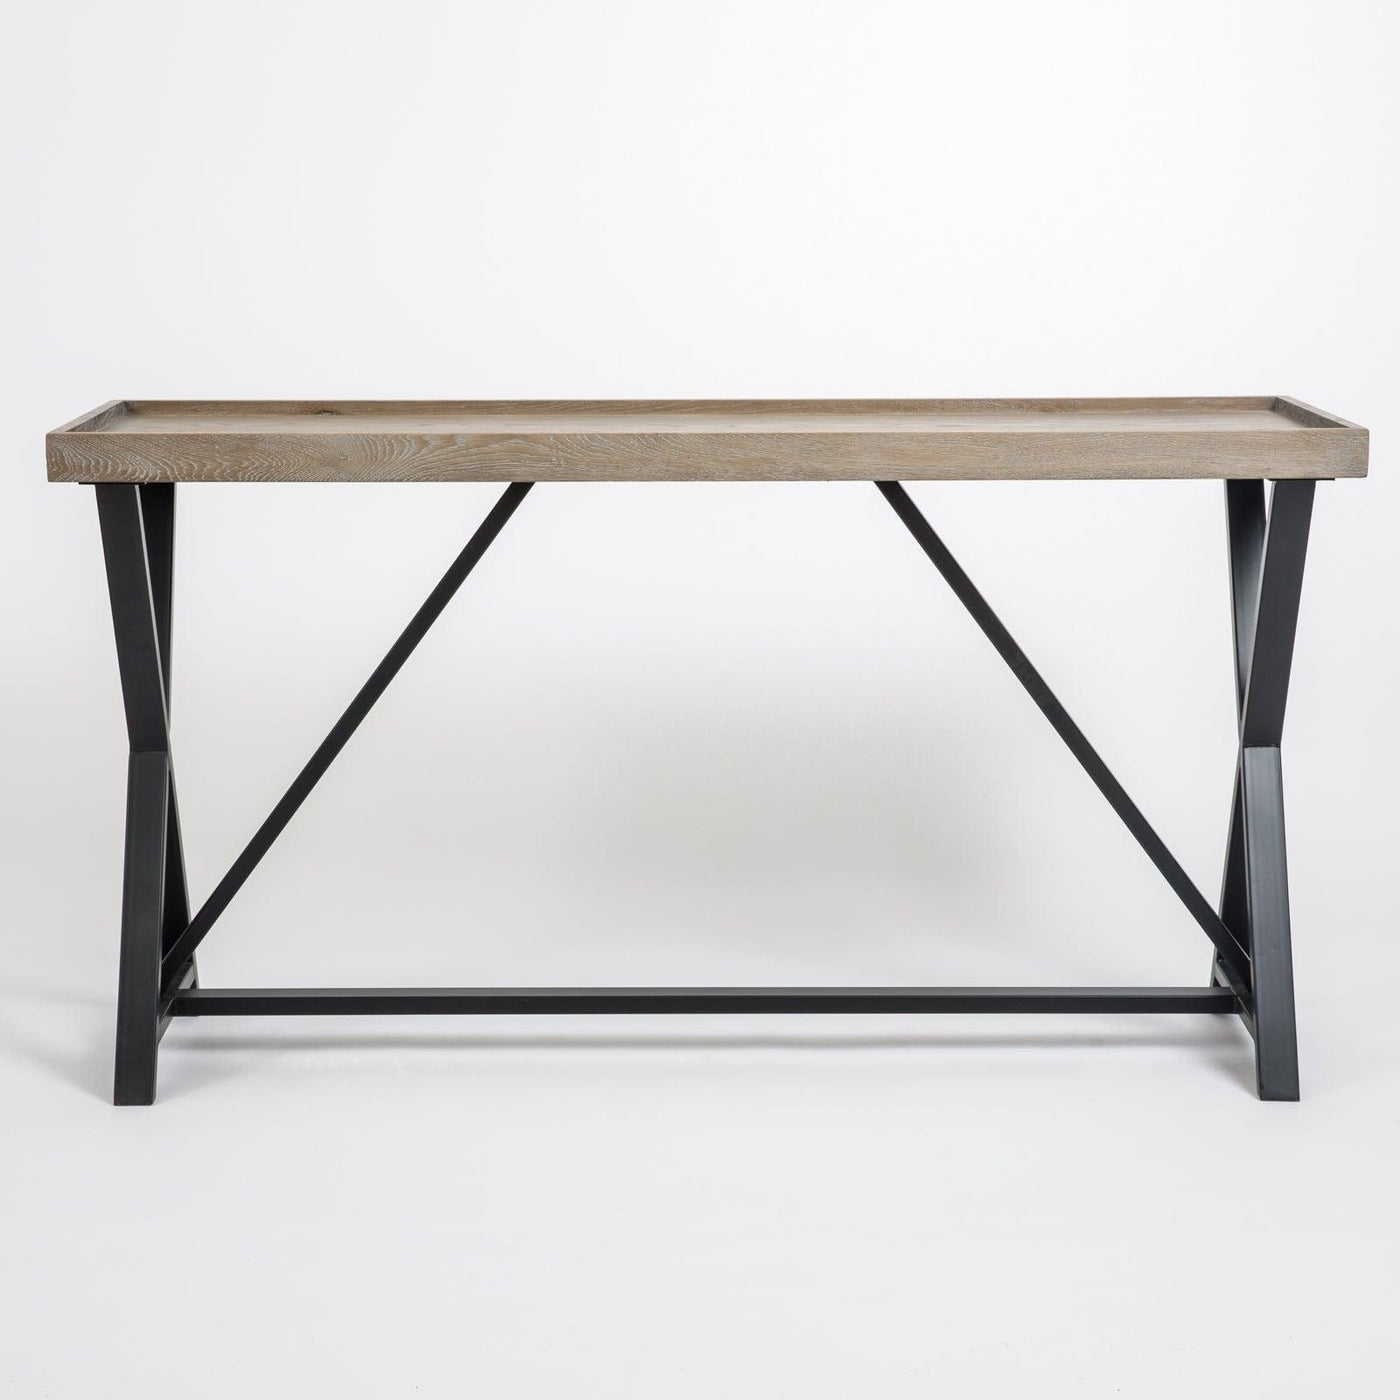 Pershore Console Table by DI Designs-Esme Furnishings